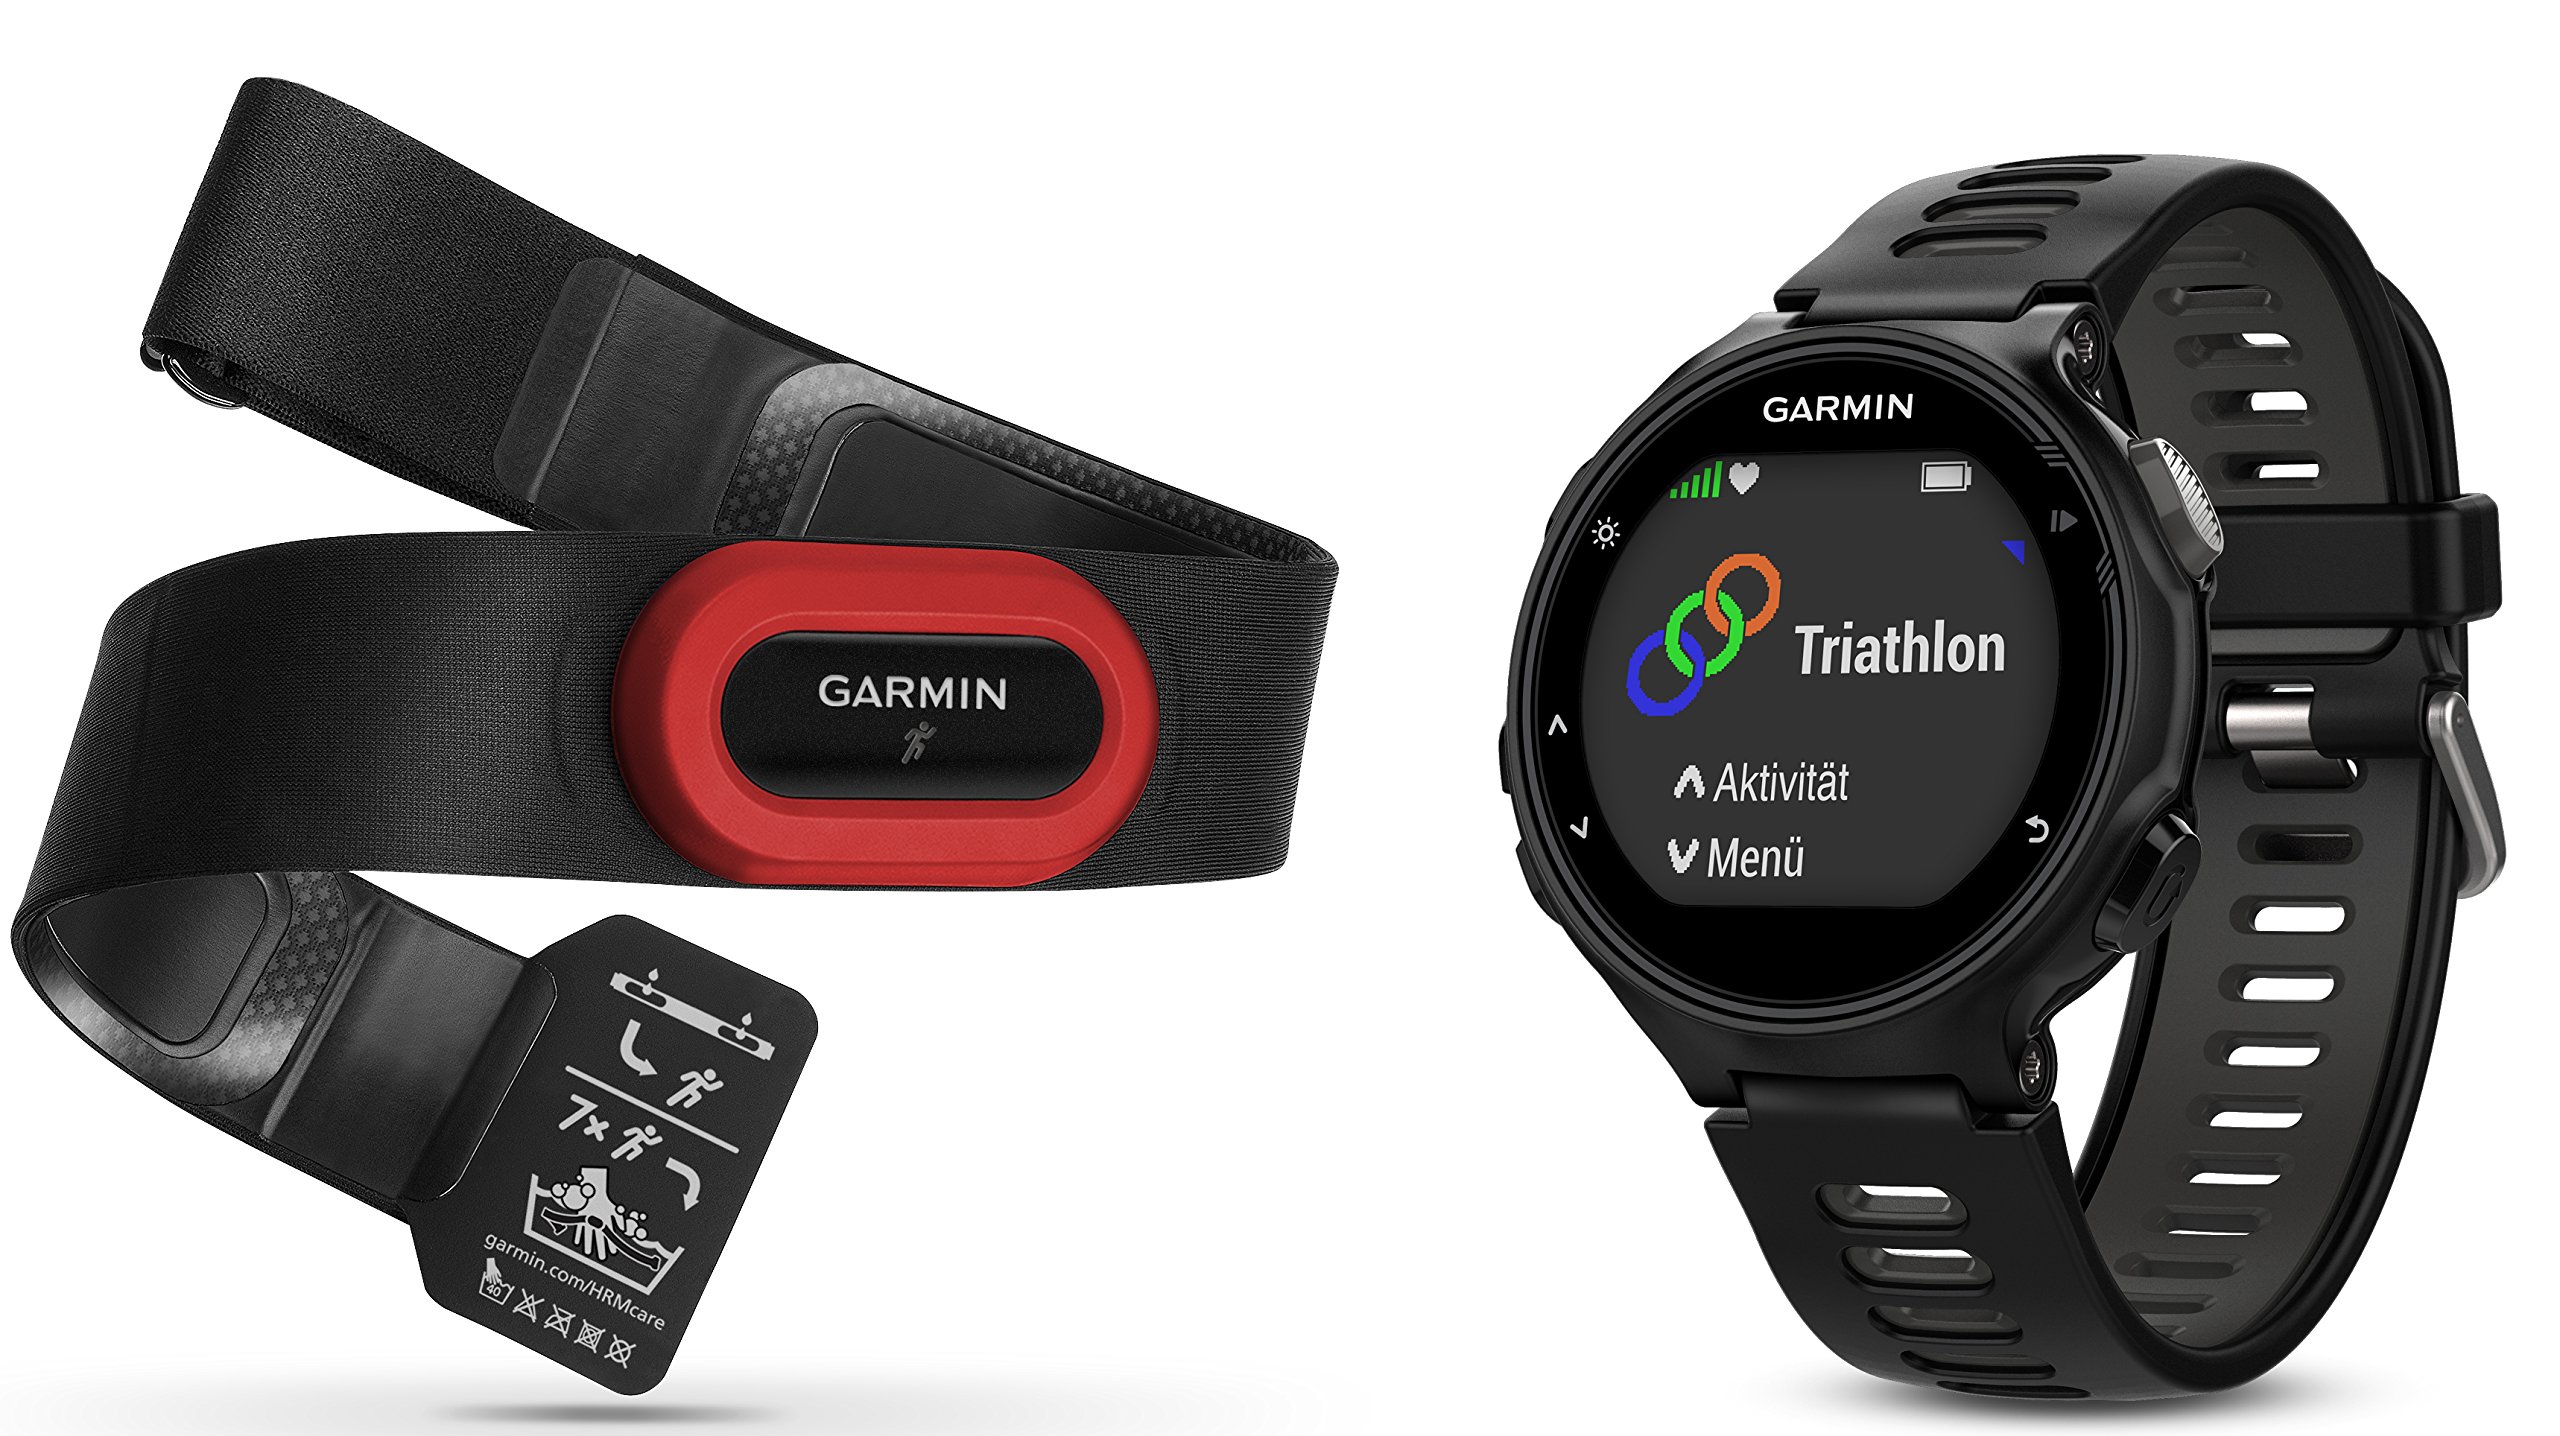 running watches with gps and heart rate monitor reviews